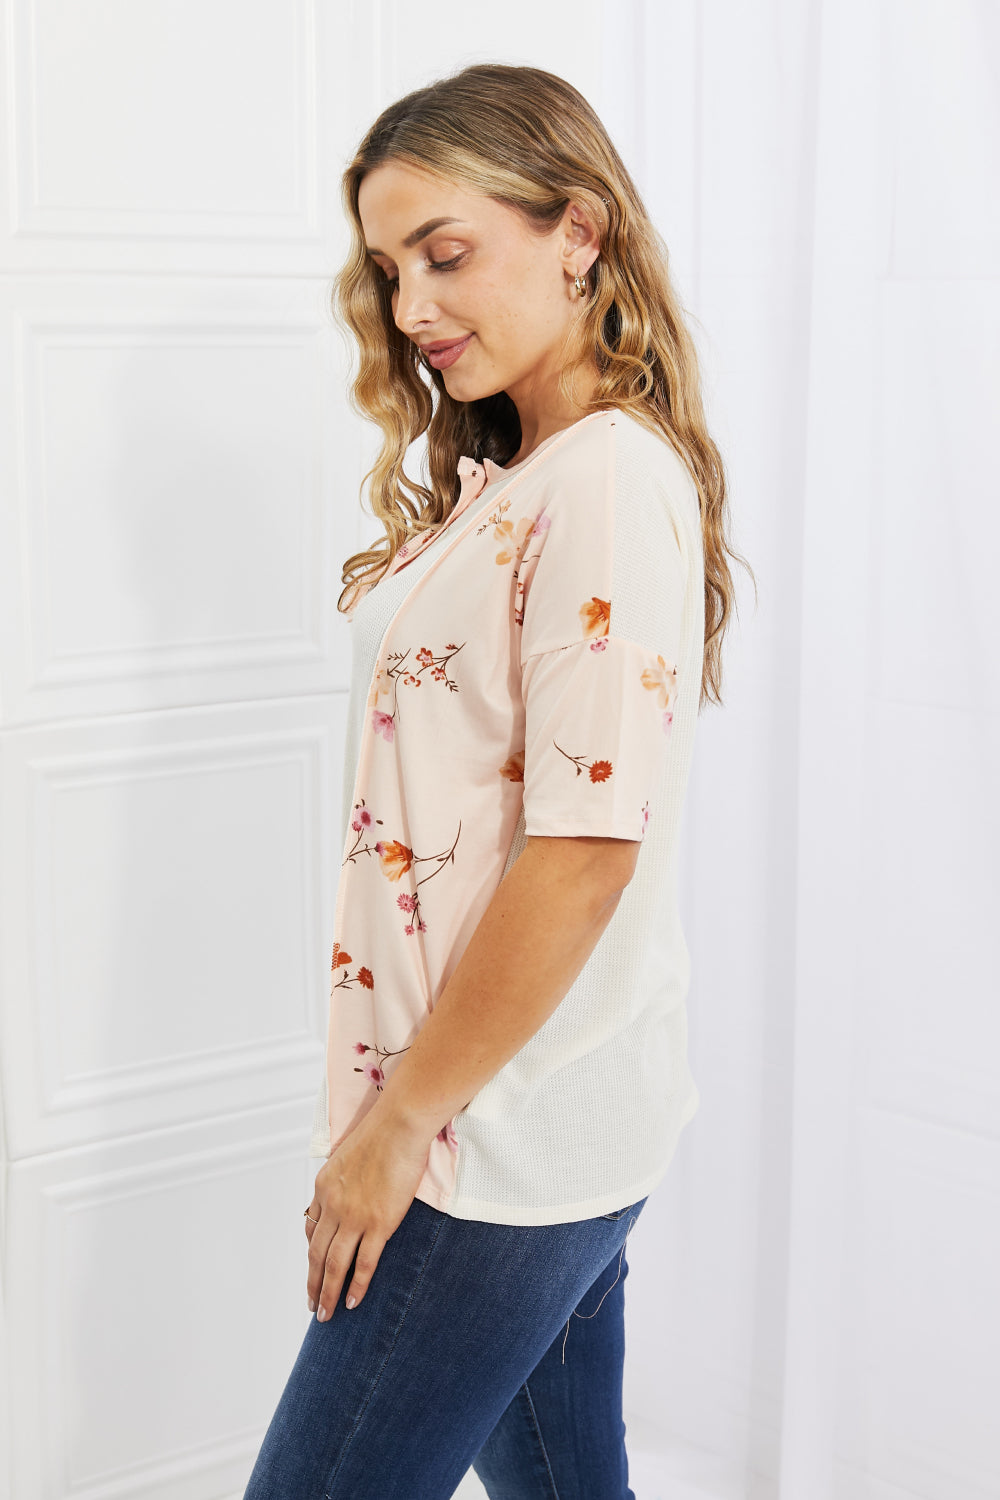 Blossoming Floral Contrast Knit Top in Blush - AnnRose Boutique